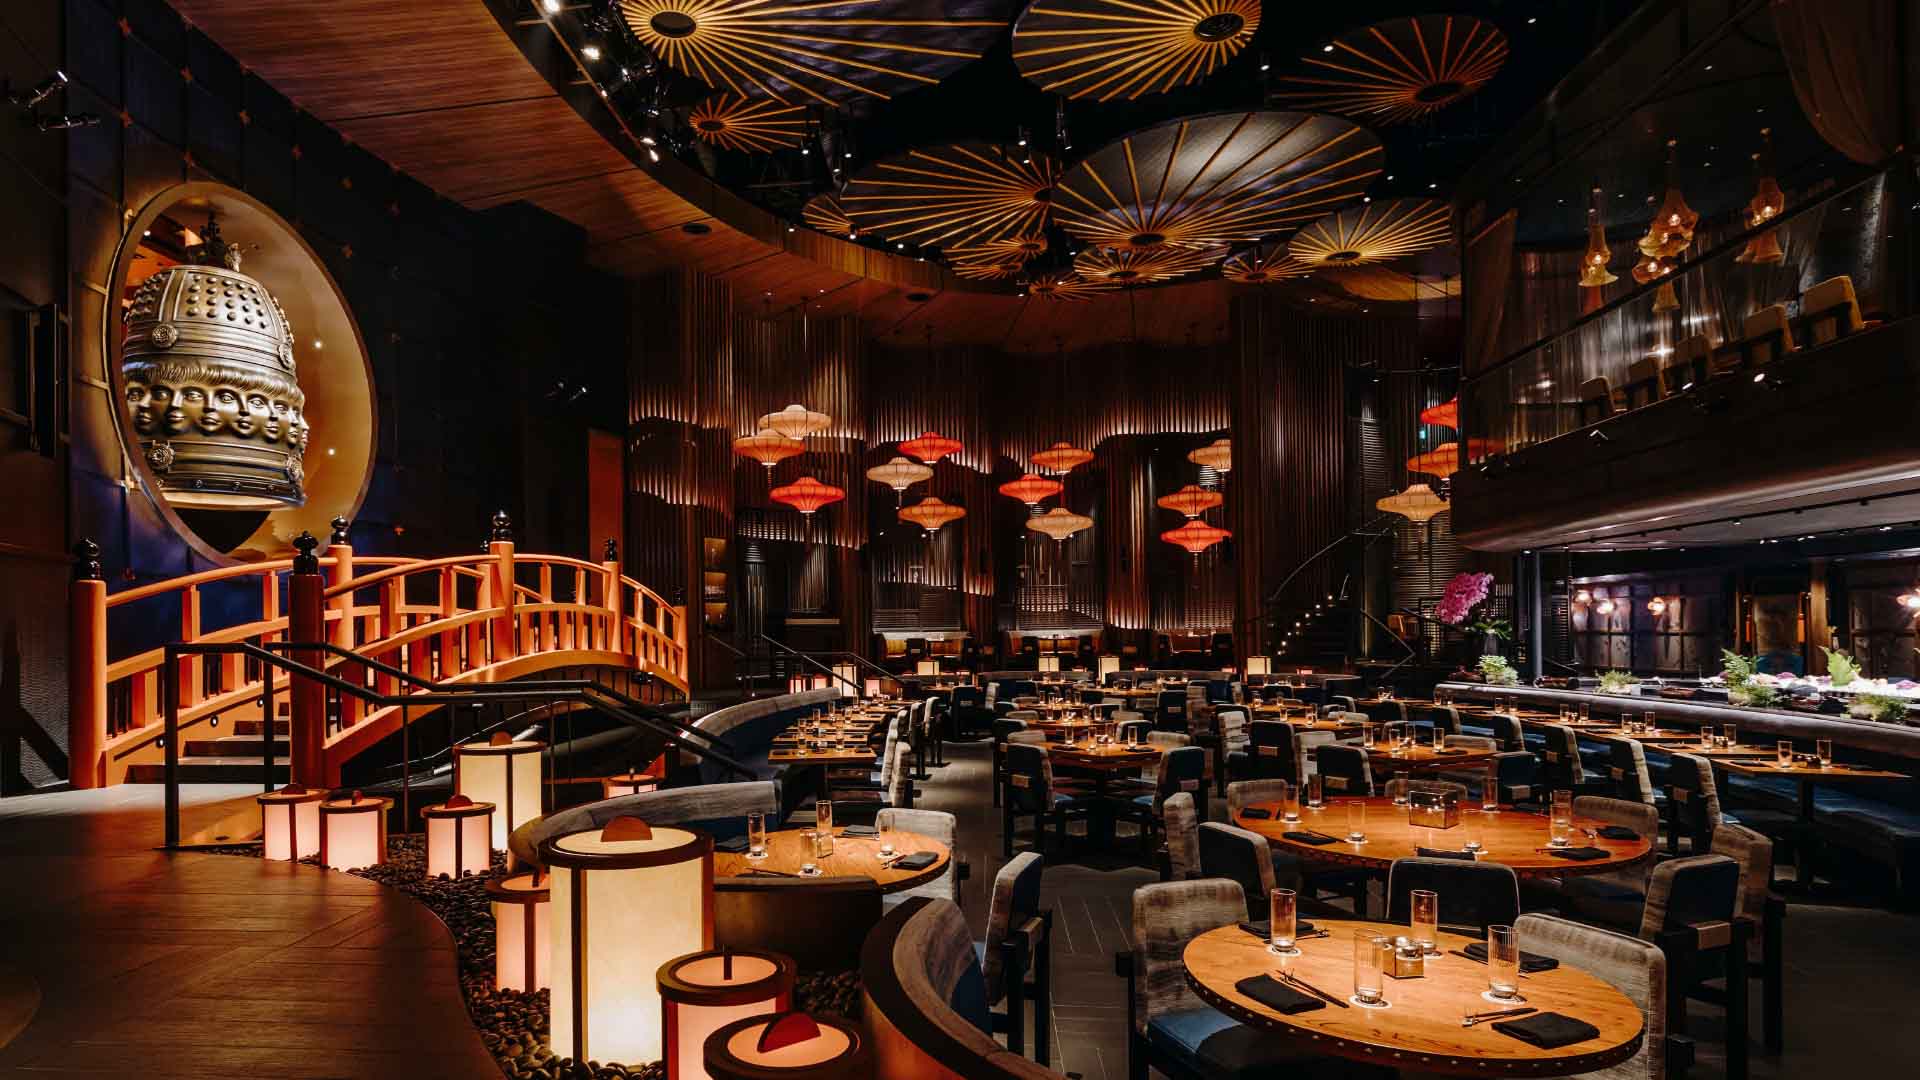 Dining area of KOMA Singapore, a Japanese fine dining restaurant